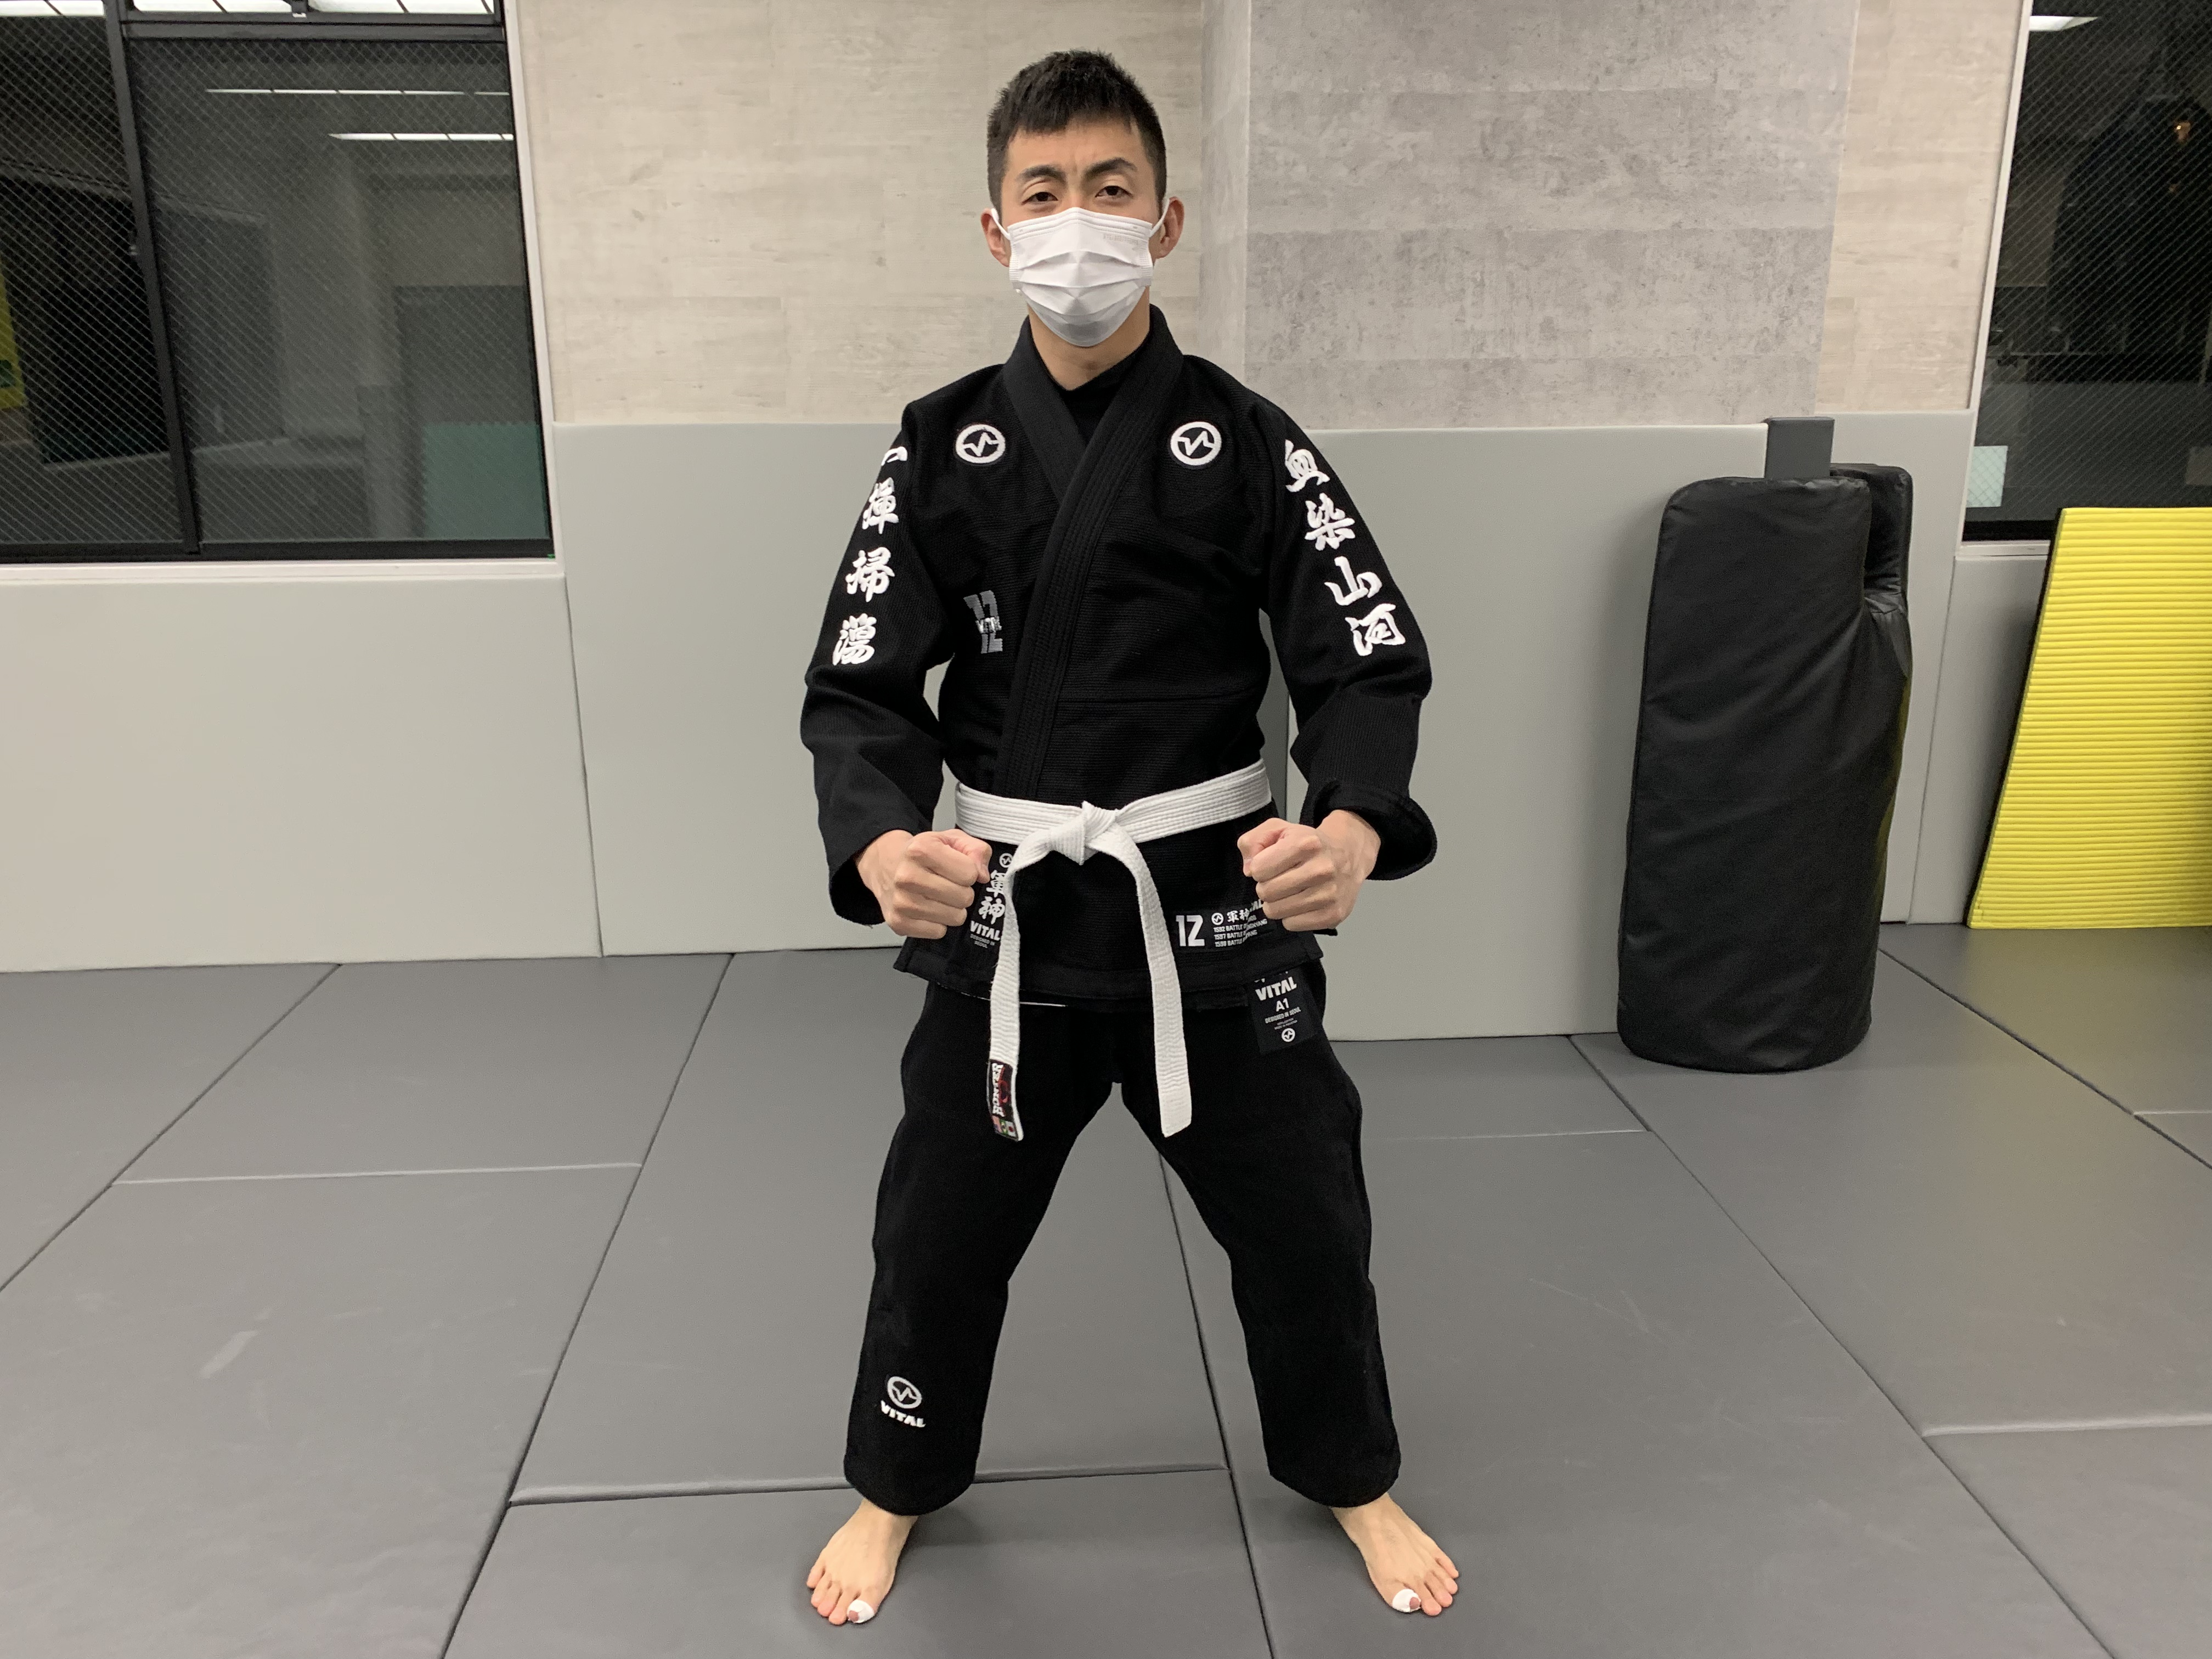 isami イサミ JJ-20 柔術帯 白帯 A2〜A5 柔術 格闘技 武道 キックボクシング 総合格闘後 通販 